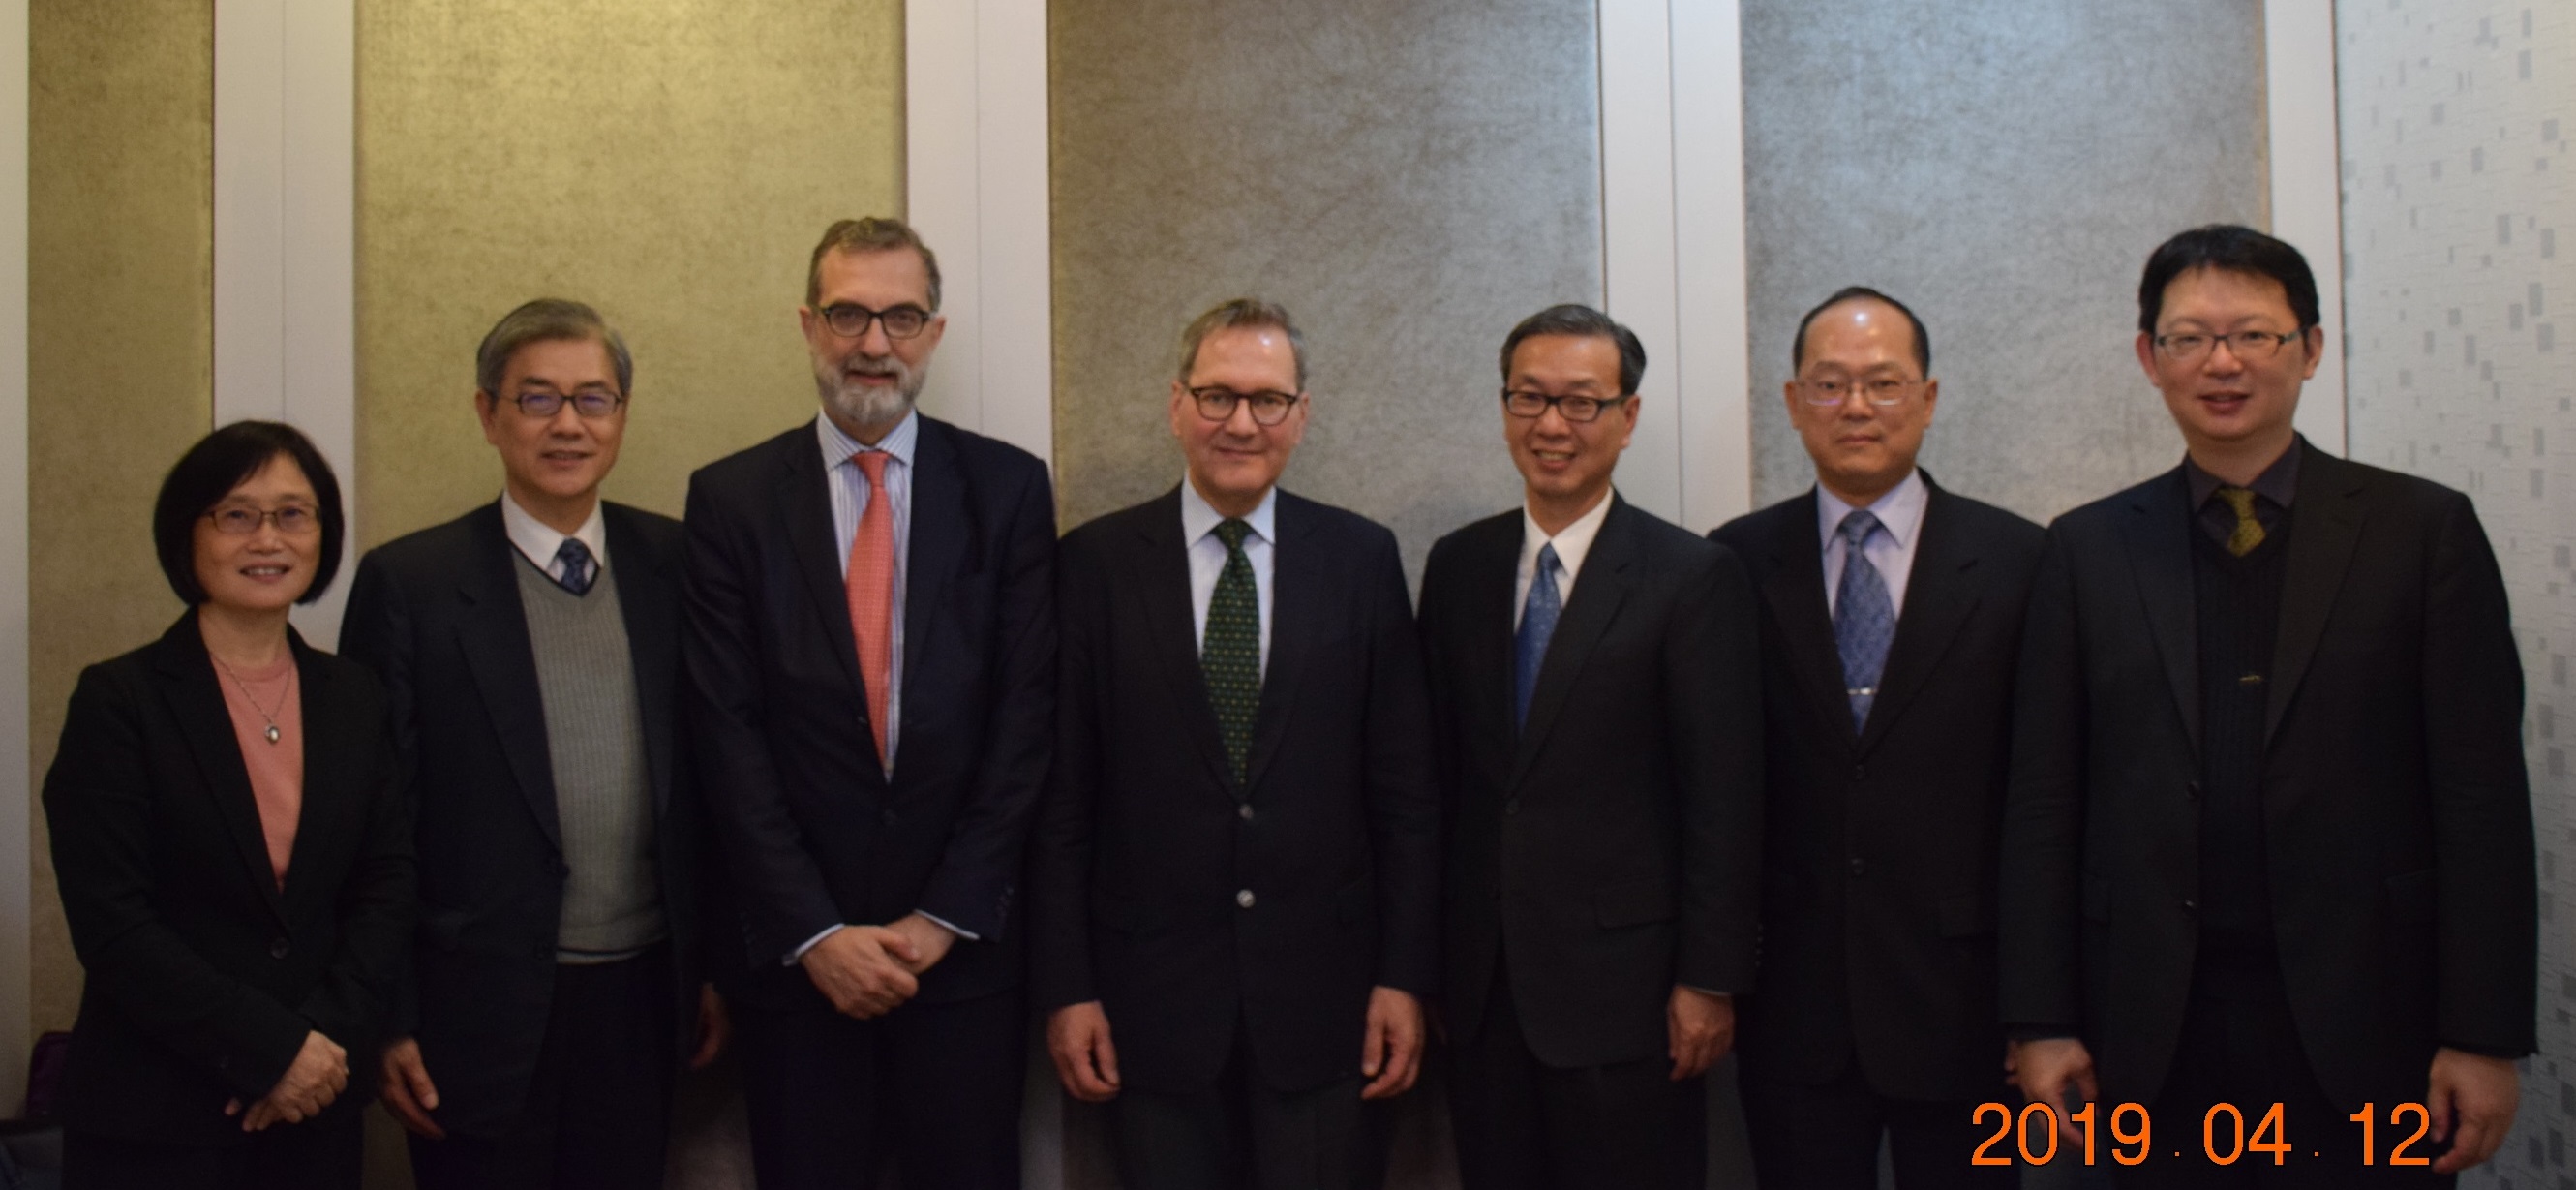 Head of the Banca d’Italia’s Tokyo representative office and Representative of the Italian Economic, Trade and Cultural Promotion Office in Taipei visit the FSC